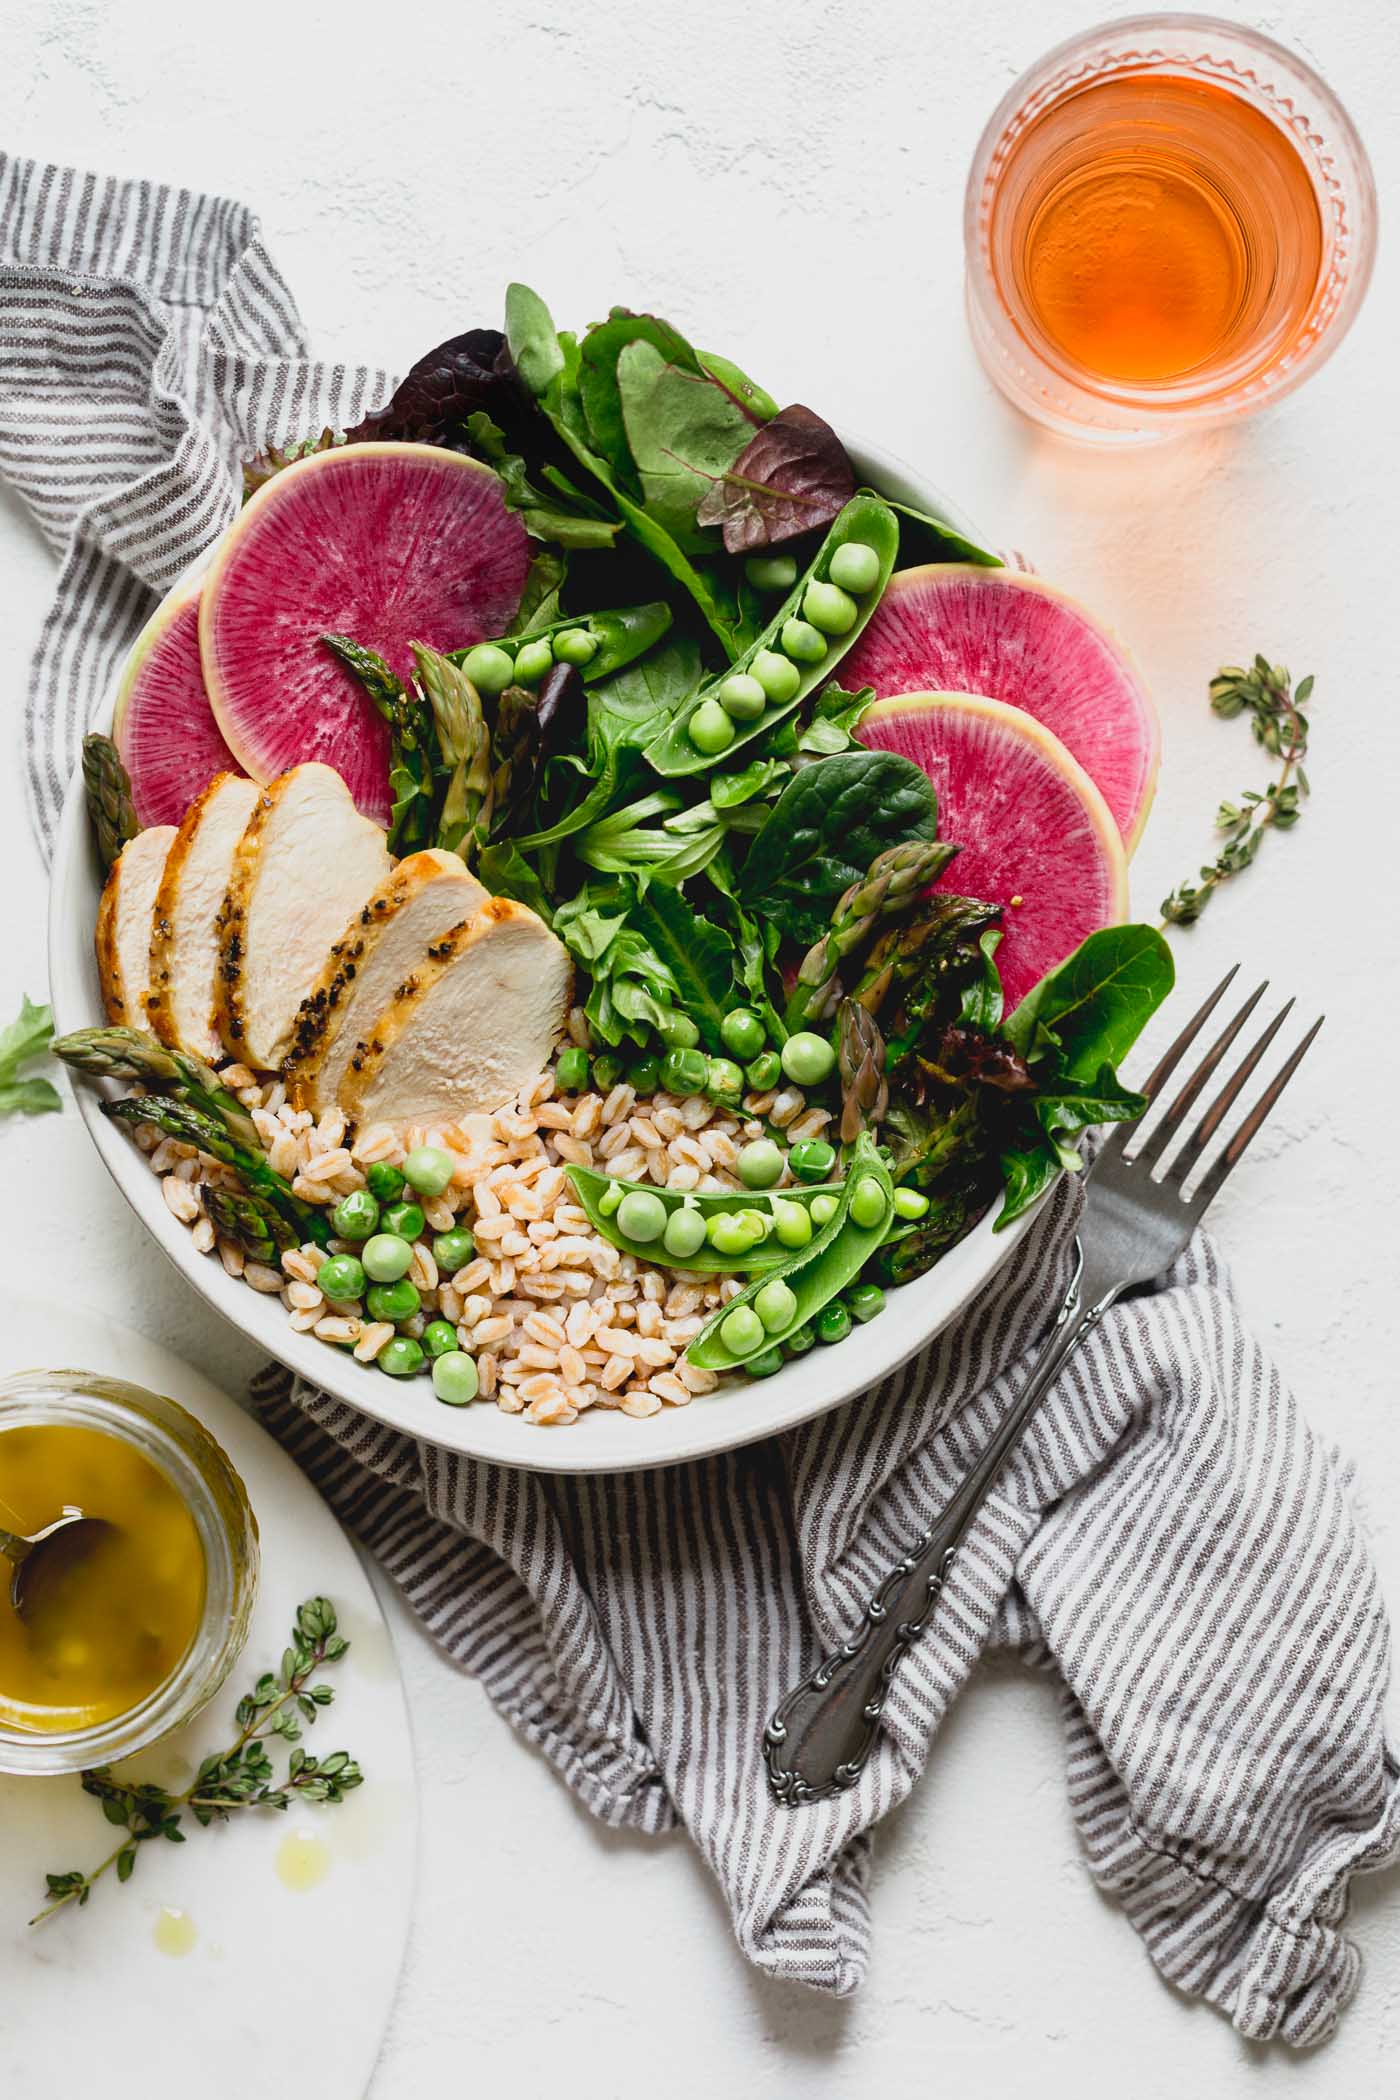 a healthy & seasonal springtime grain bowl with farro, asparagus, spring peas, greens, herbed chicken & a simple homemade lemon vinaigrette. this spring goddess grain bowl recipe is totally wholesome, meal prep friendly, & comes together in 30 minutes or less. the perfect easy weeknight dinner for this spring! #grainbowl #healthygrainbowl #saladrecipe #mealpreprecipe #springrecipe #asparagus #springpeas